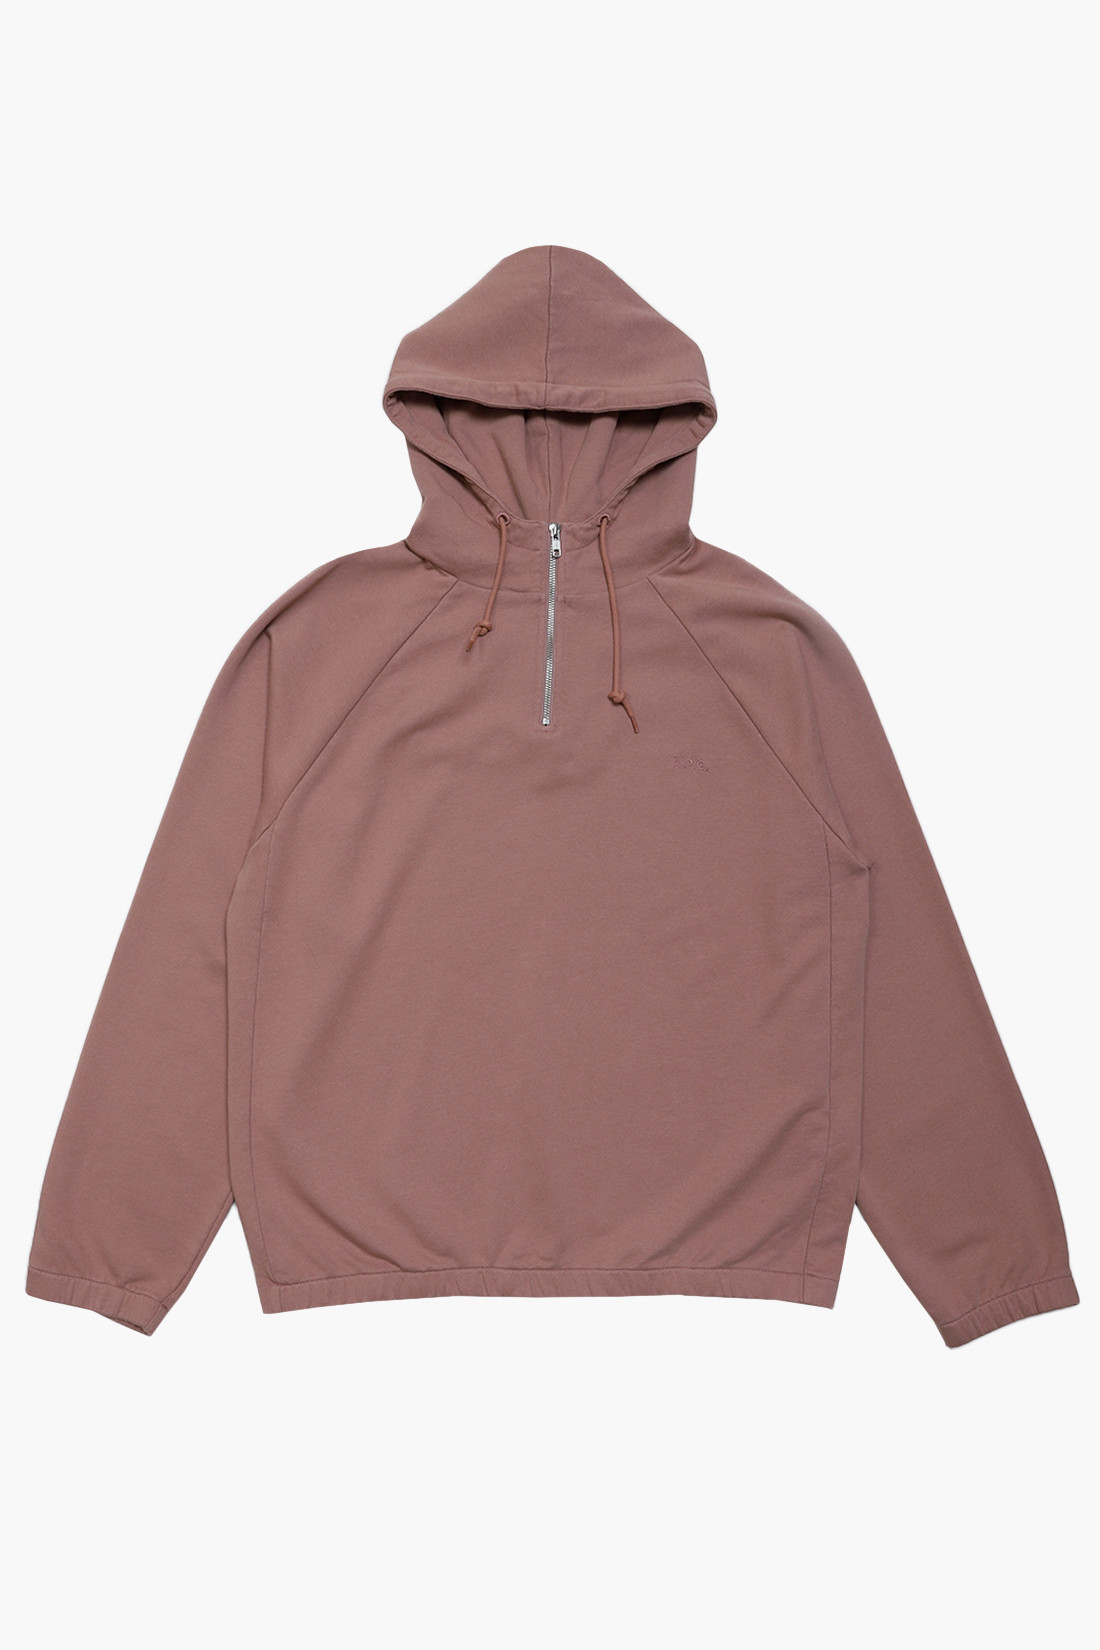 Hoodie ethan Rose poudre